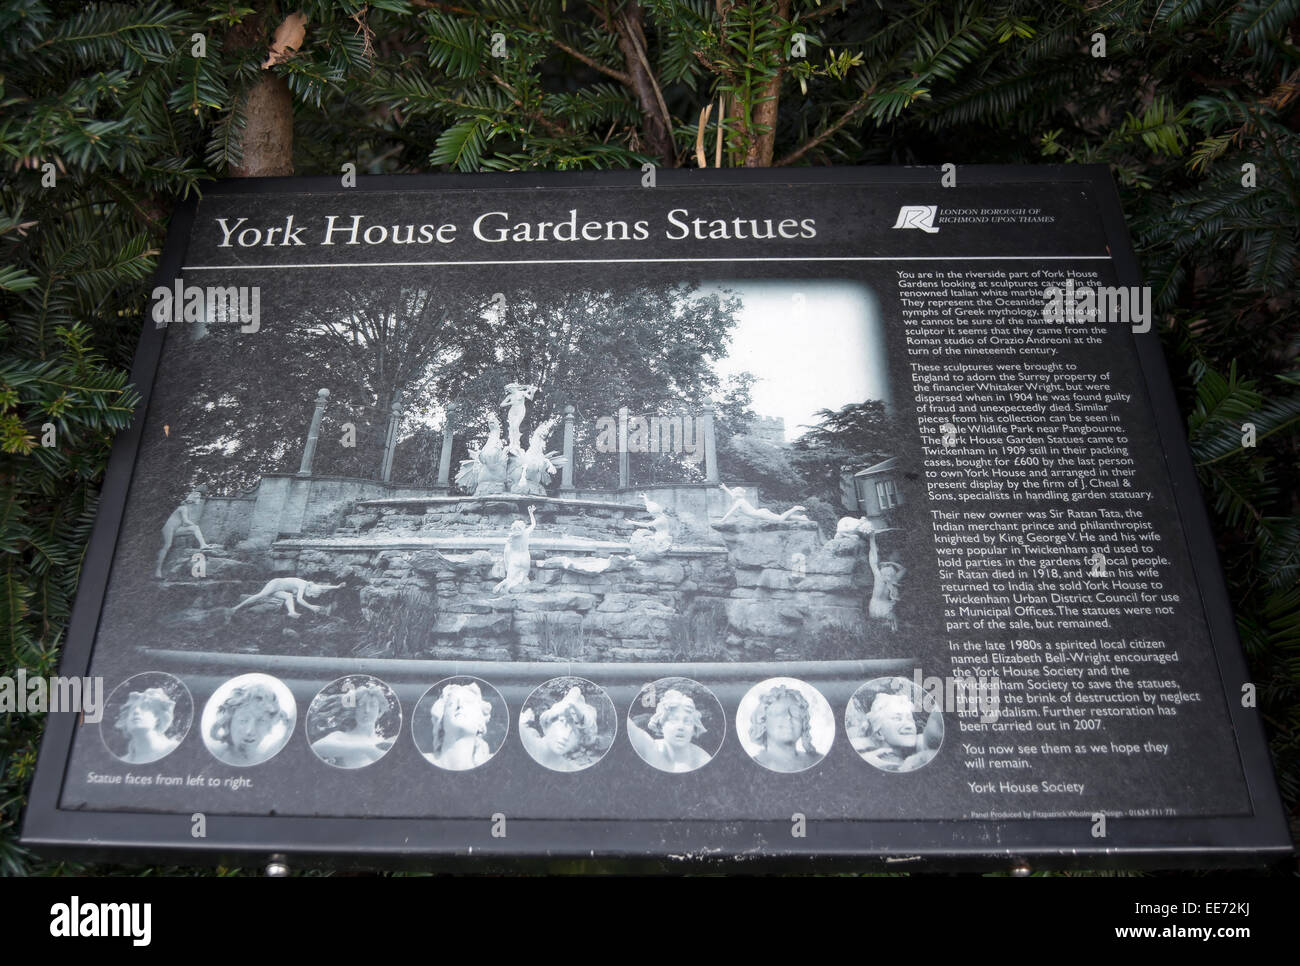 Noticeboard décrivant le york house gardens statues, York House, Twickenham, Middlesex, Angleterre Banque D'Images